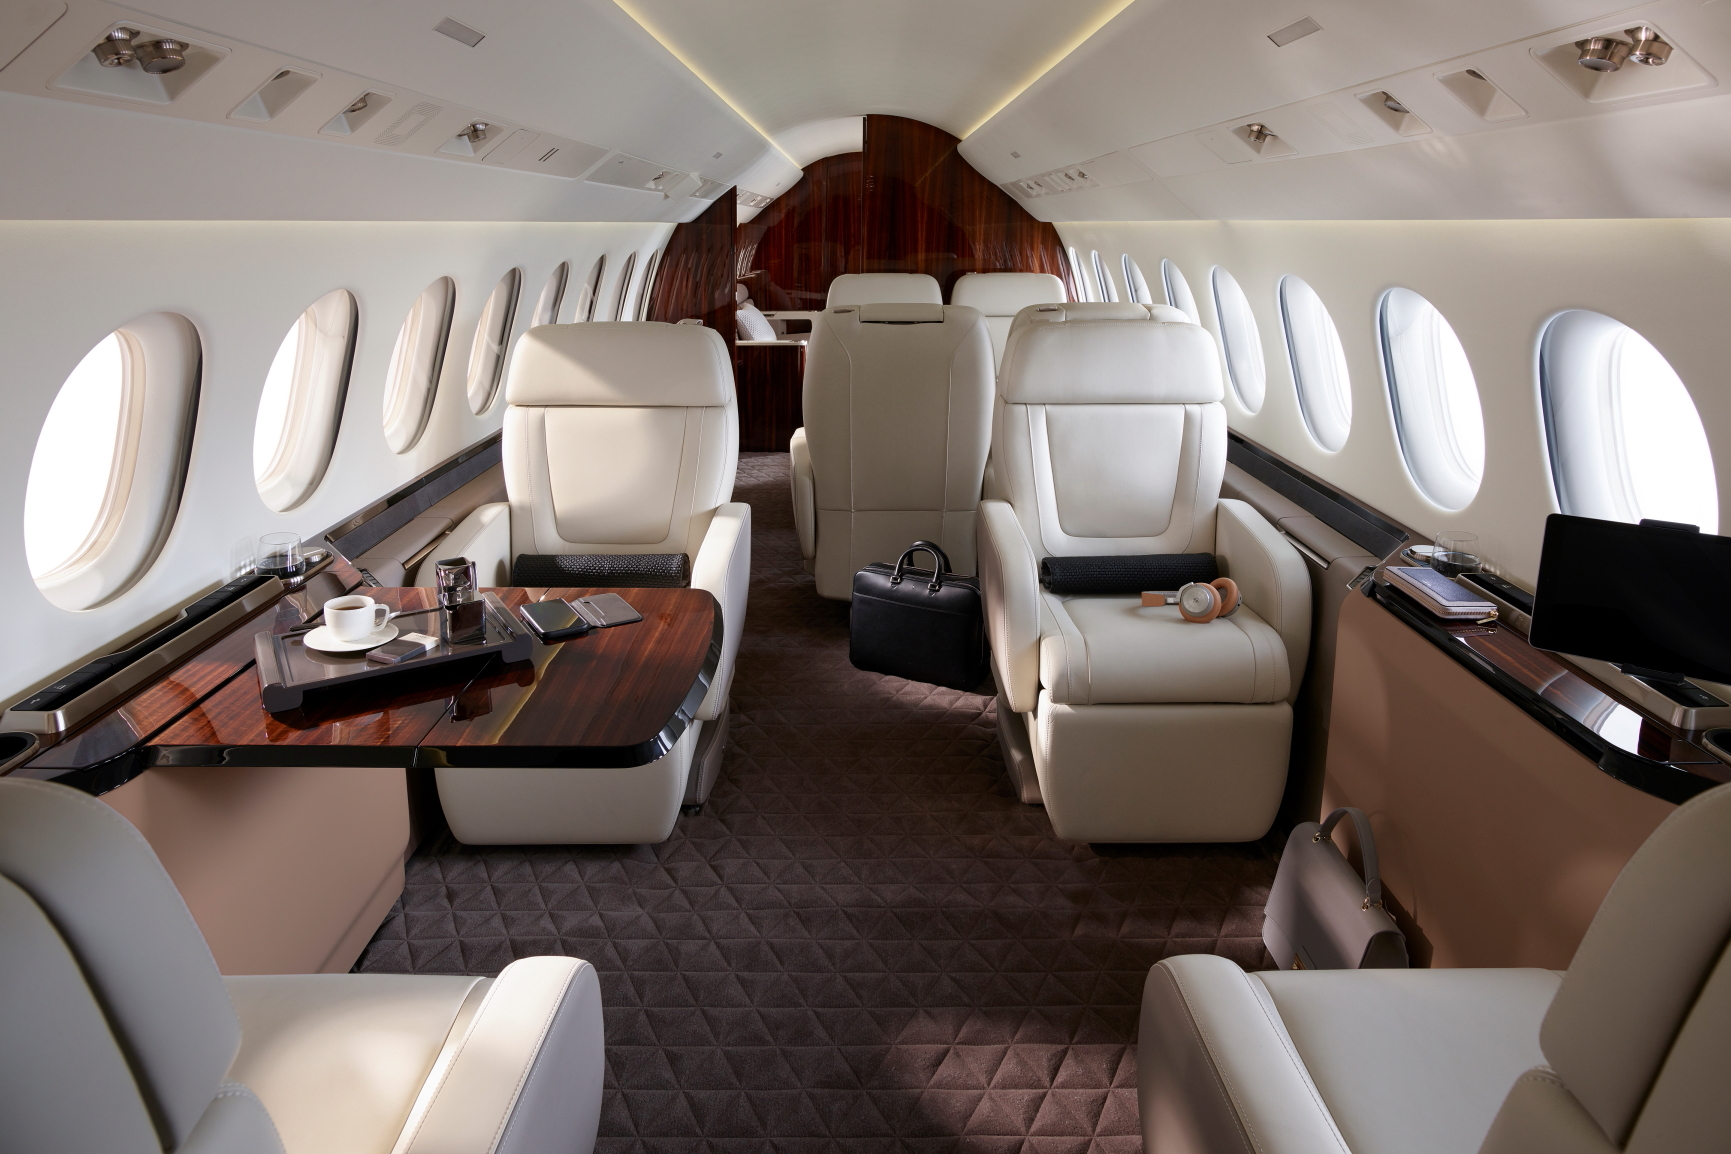 Dassault Aviation has upgraded the interior of its flagship aircraft, the ultra-long-range Falcon 8X. Click to enlarge.